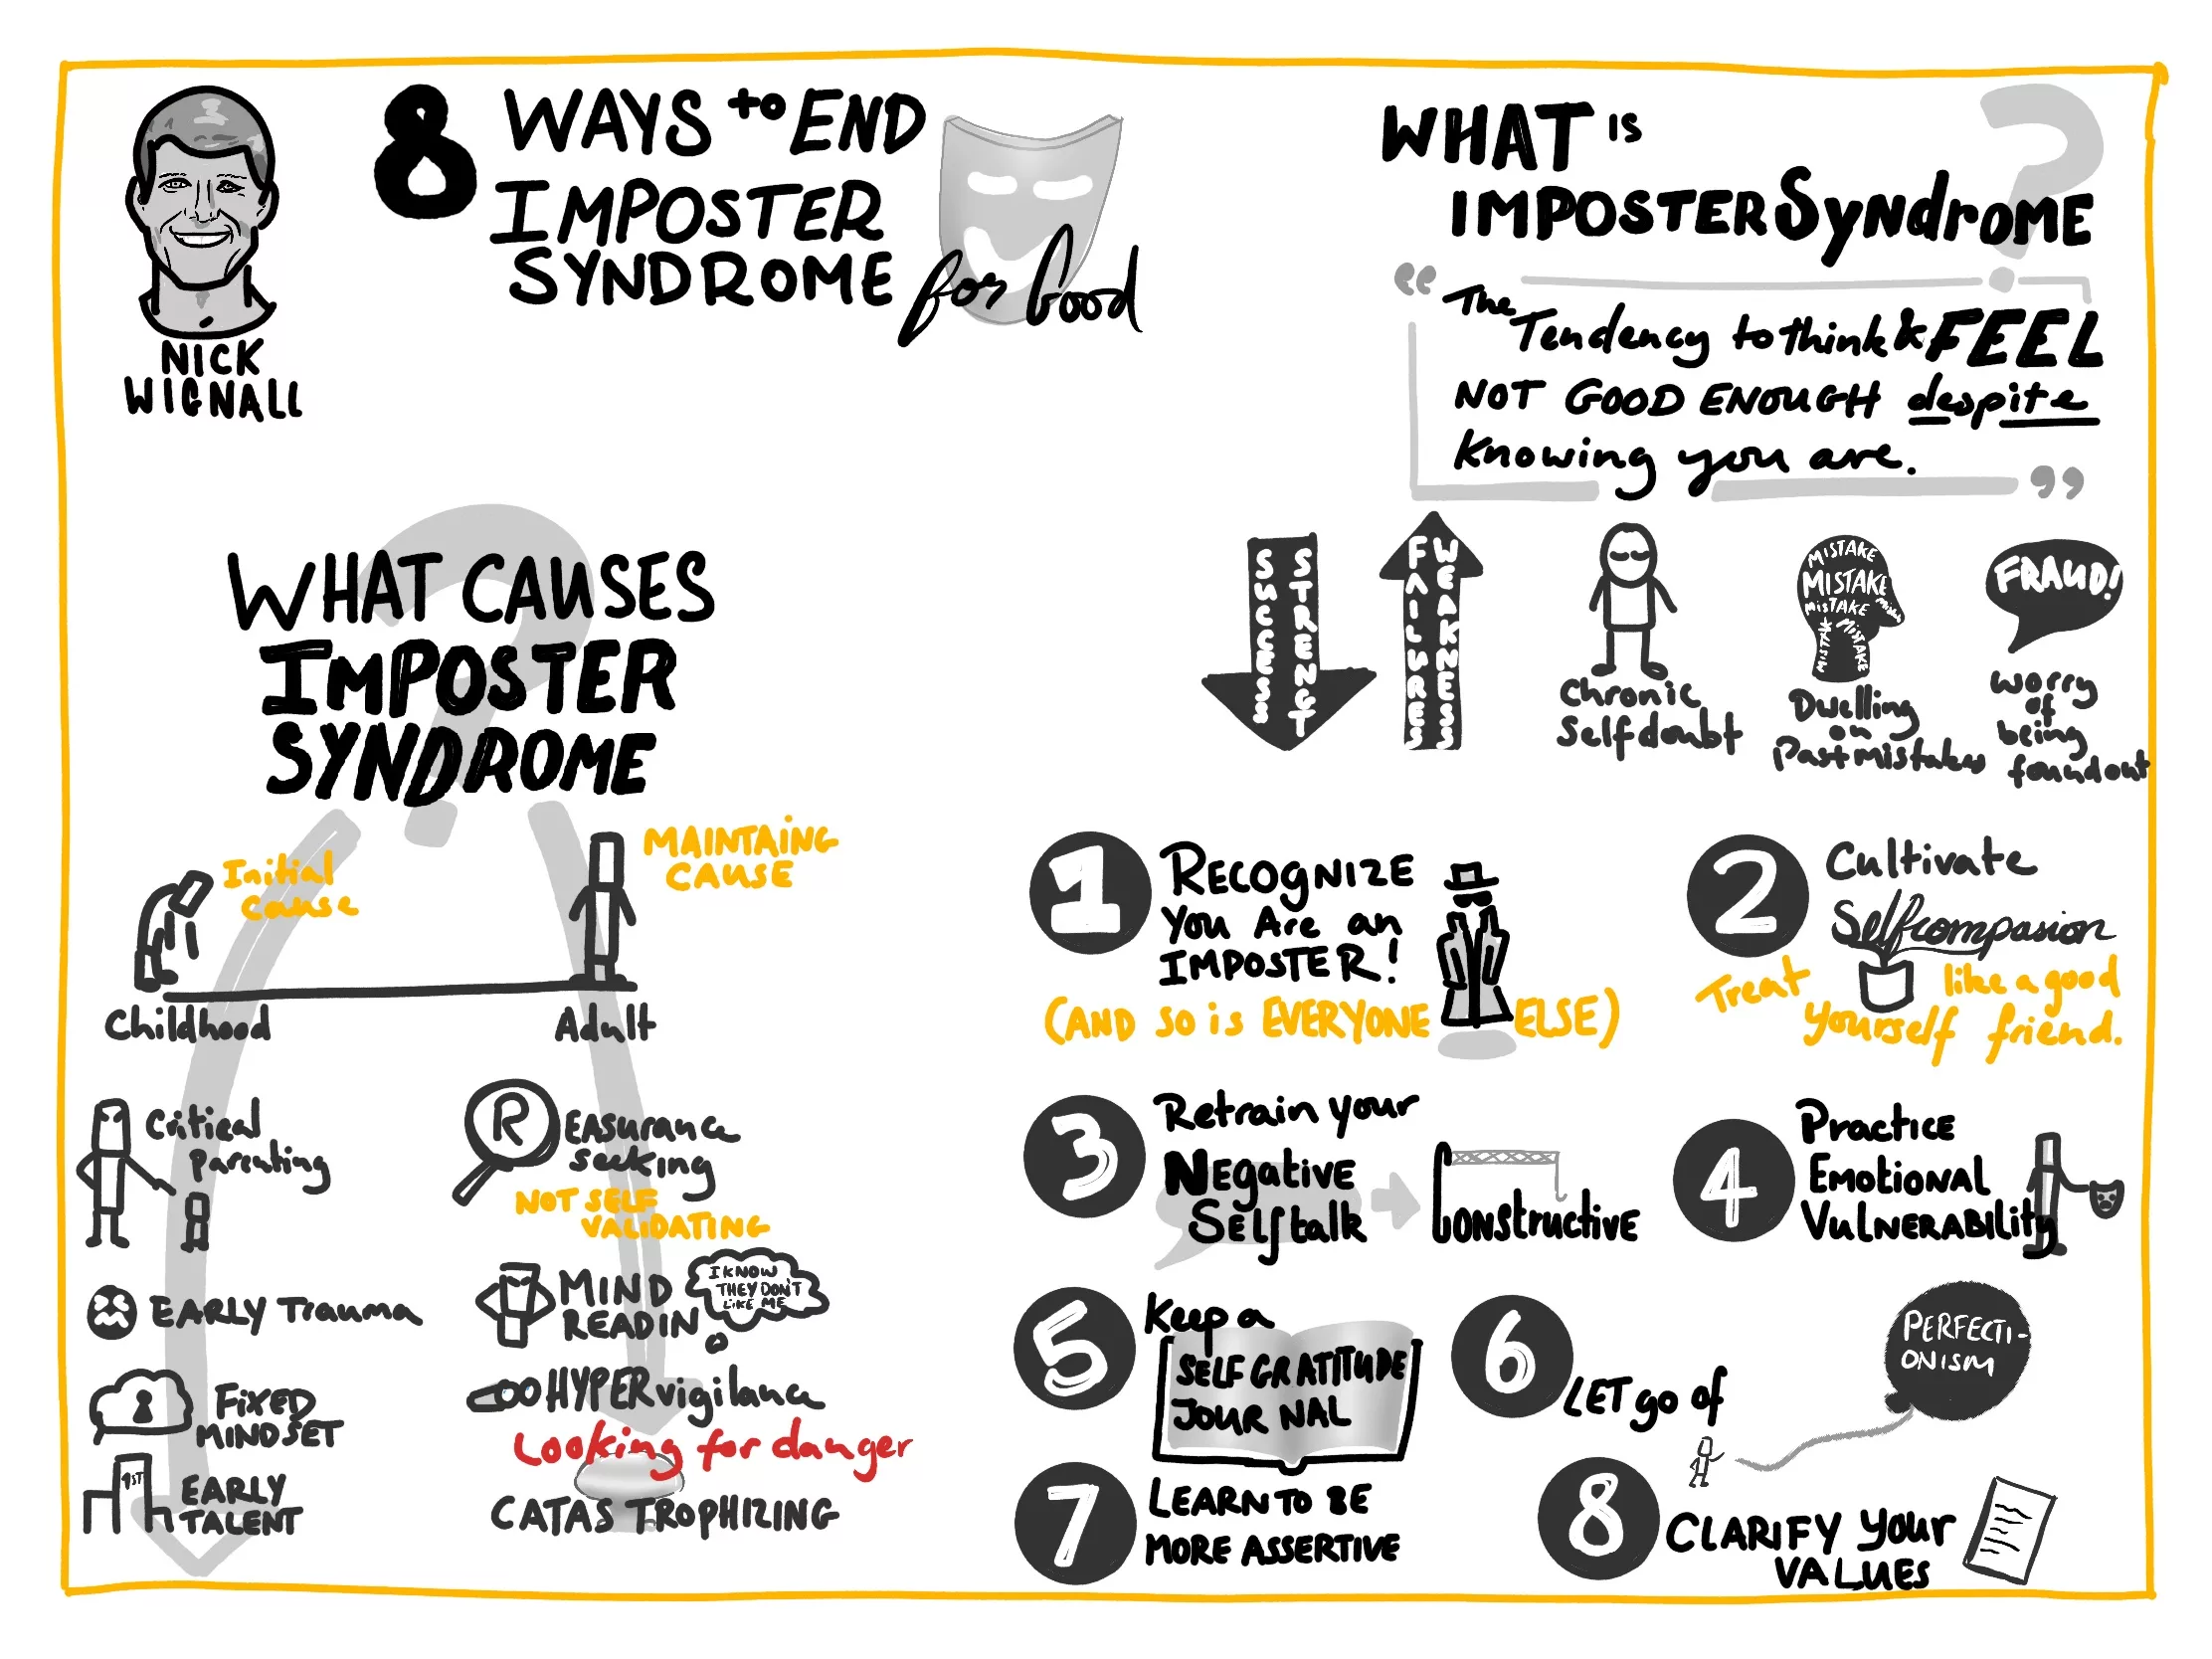 a sketchnote summary of nick wignall's article 8 ways to overcome imposter syndrome for good.